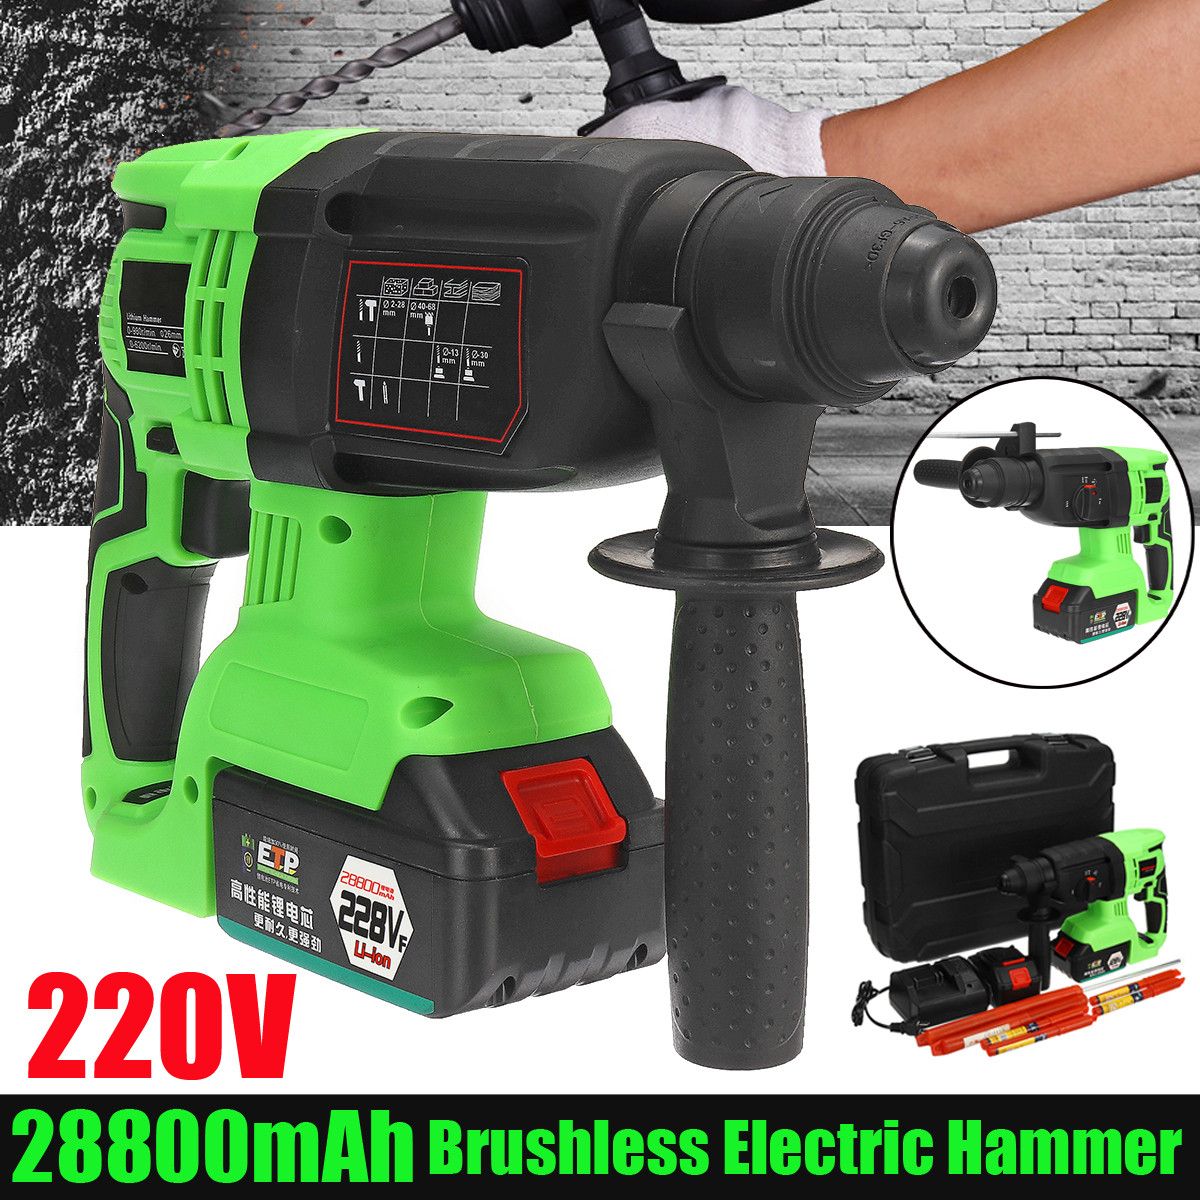 28800mAh-Electric-Brushless-Hammer-Drill-Kit-Cordless-Power-Impact-Drill-W-1-or-2-Lithium-Battery-1466931